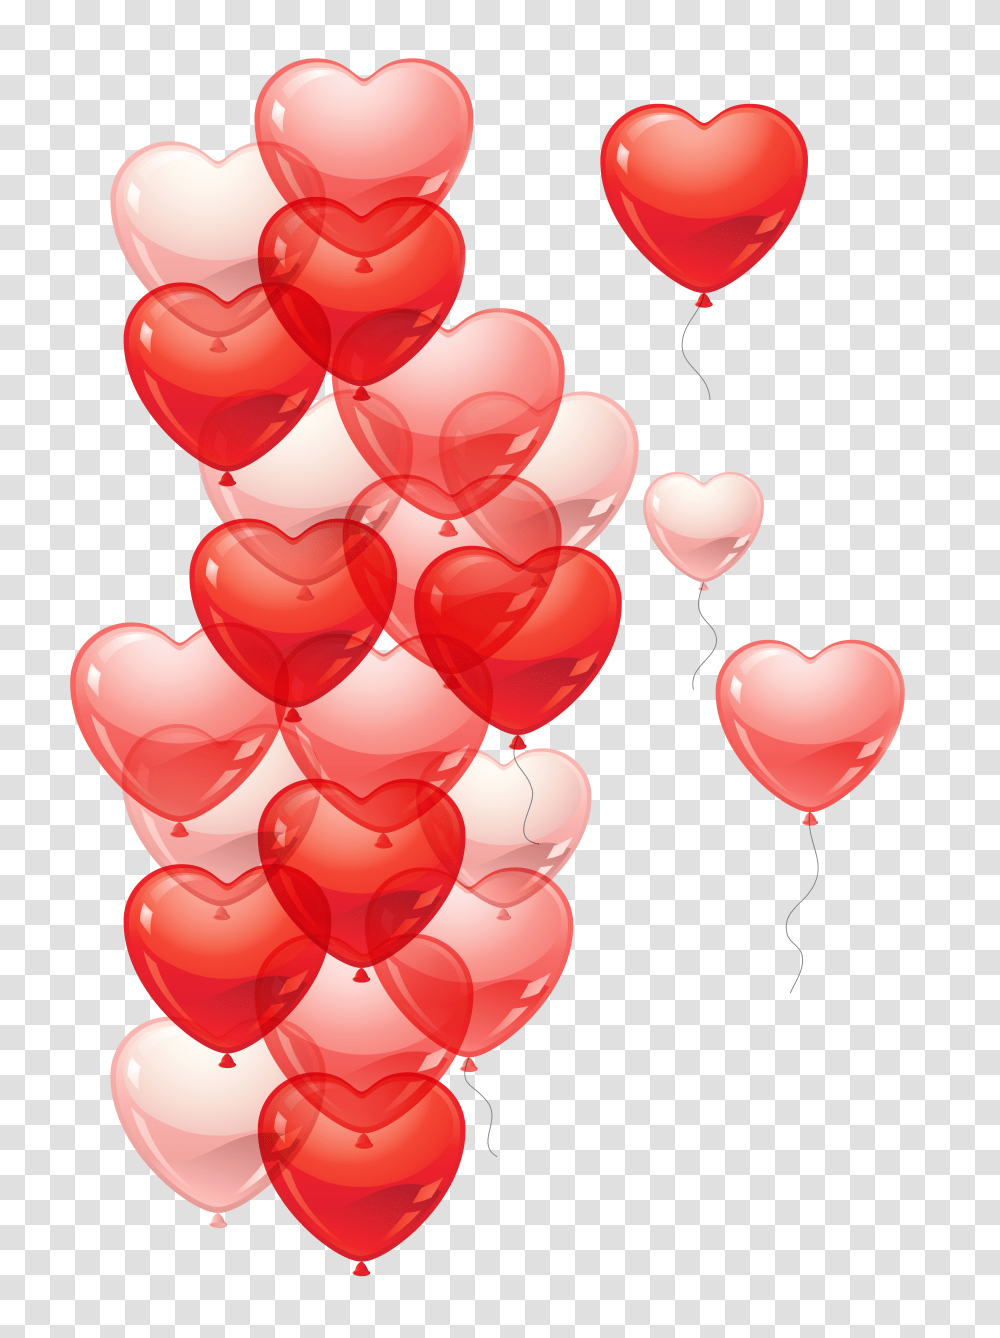 Download Hd Freeuse Stock Heart Bubbles Clipart Heart Shaped Balloons, Plant, Fruit, Food, Strawberry Transparent Png